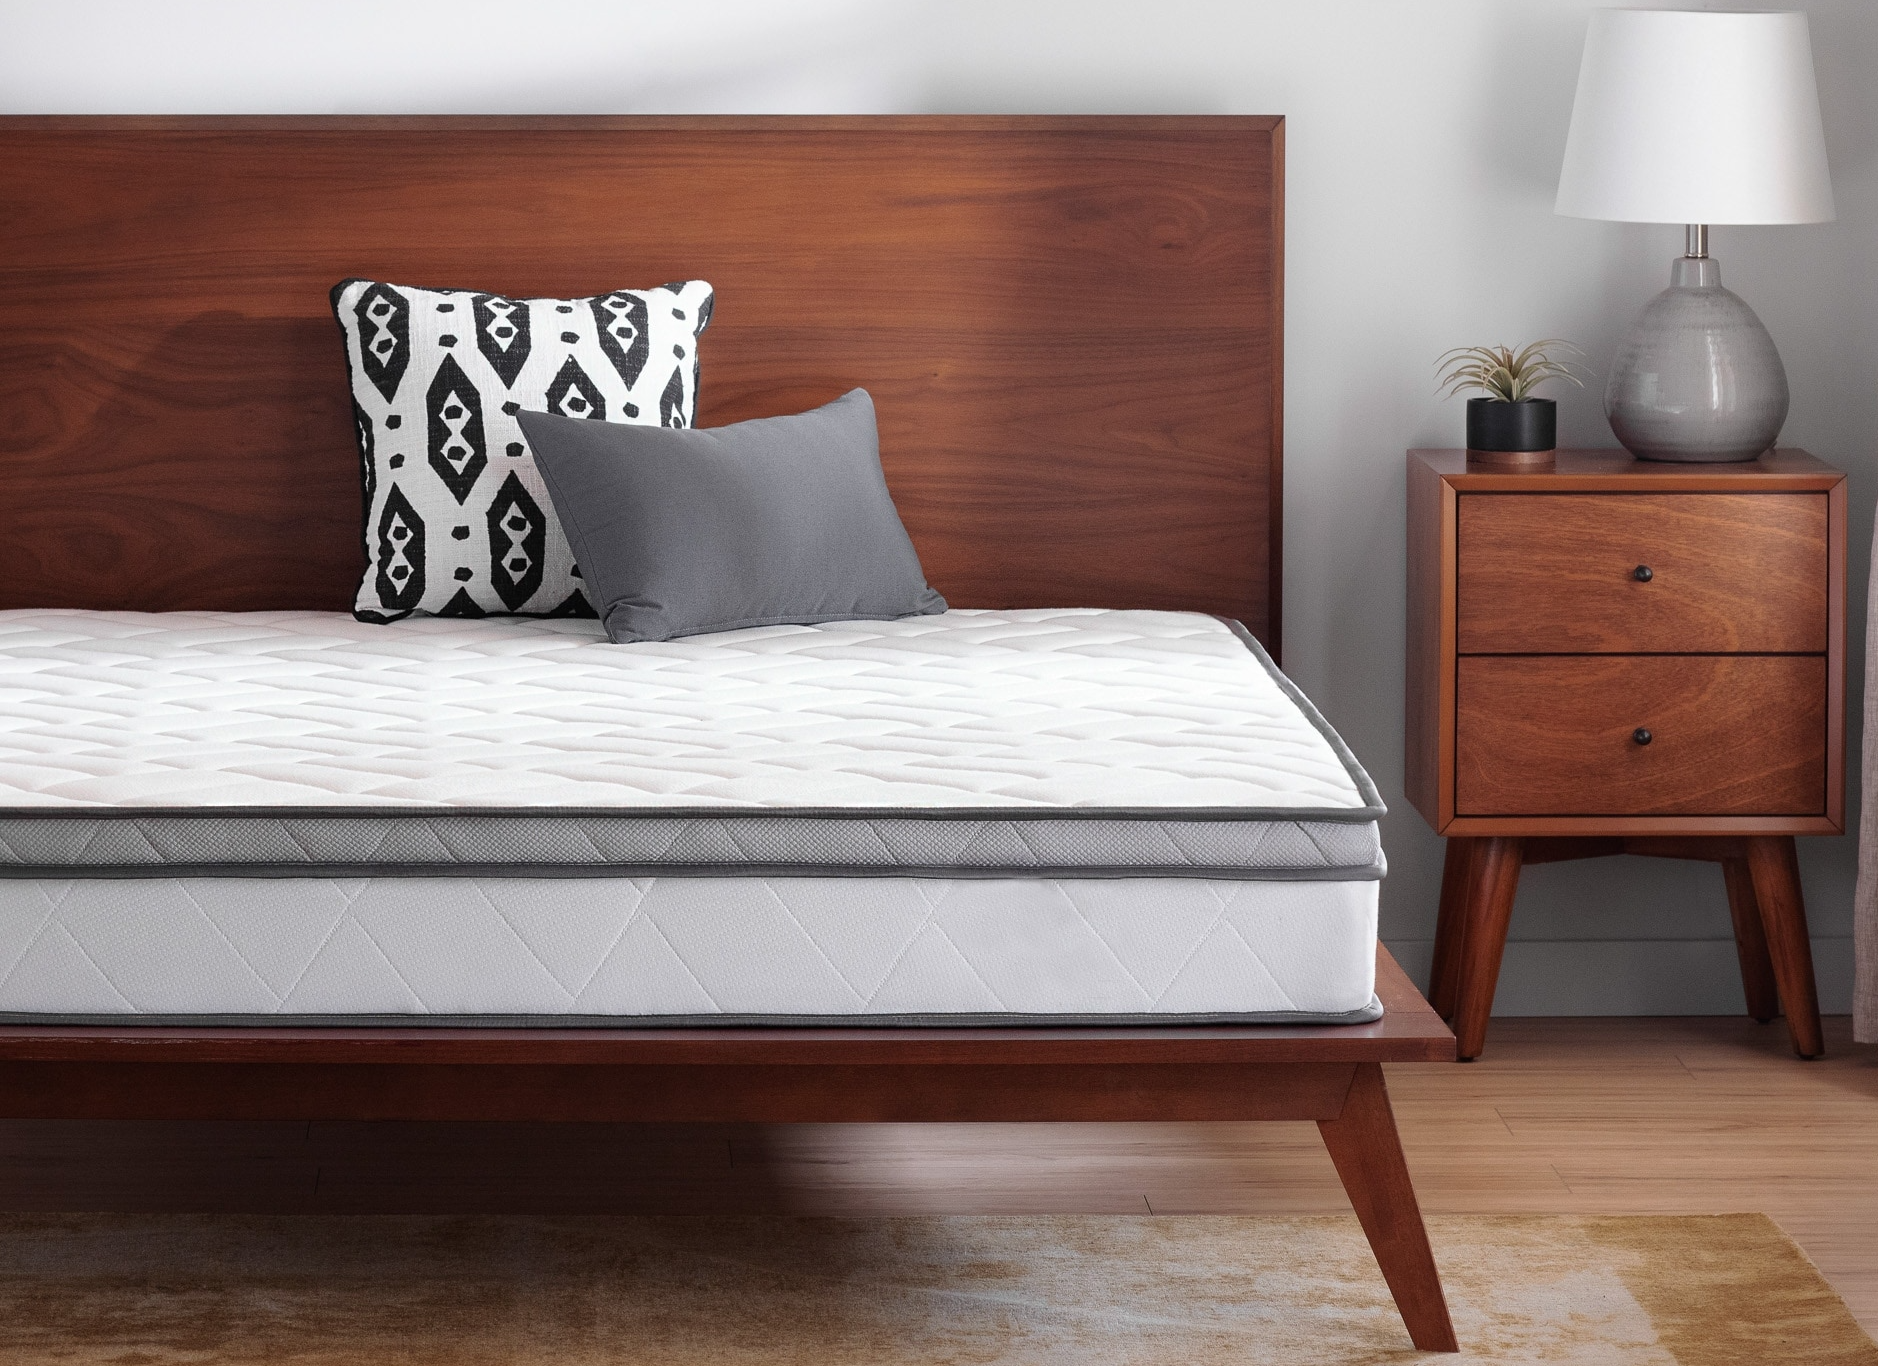 A mattress sitting on a bed frame. There is a nightstand by its side. There is a small plant and table lamp on the nightstand. 